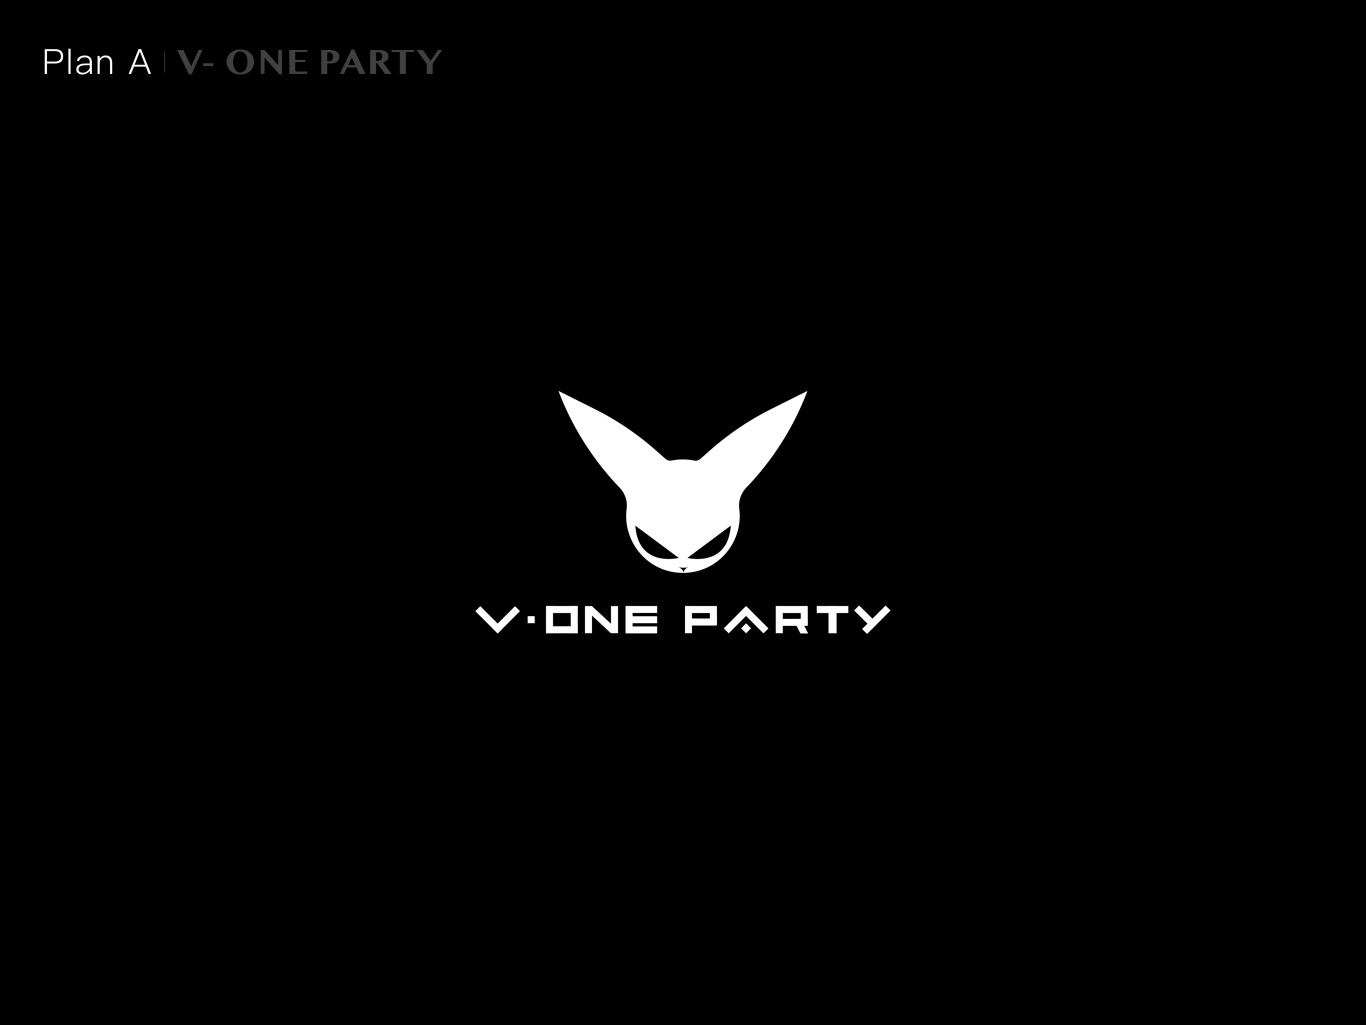 V-ONE PARTY夜店品牌图14